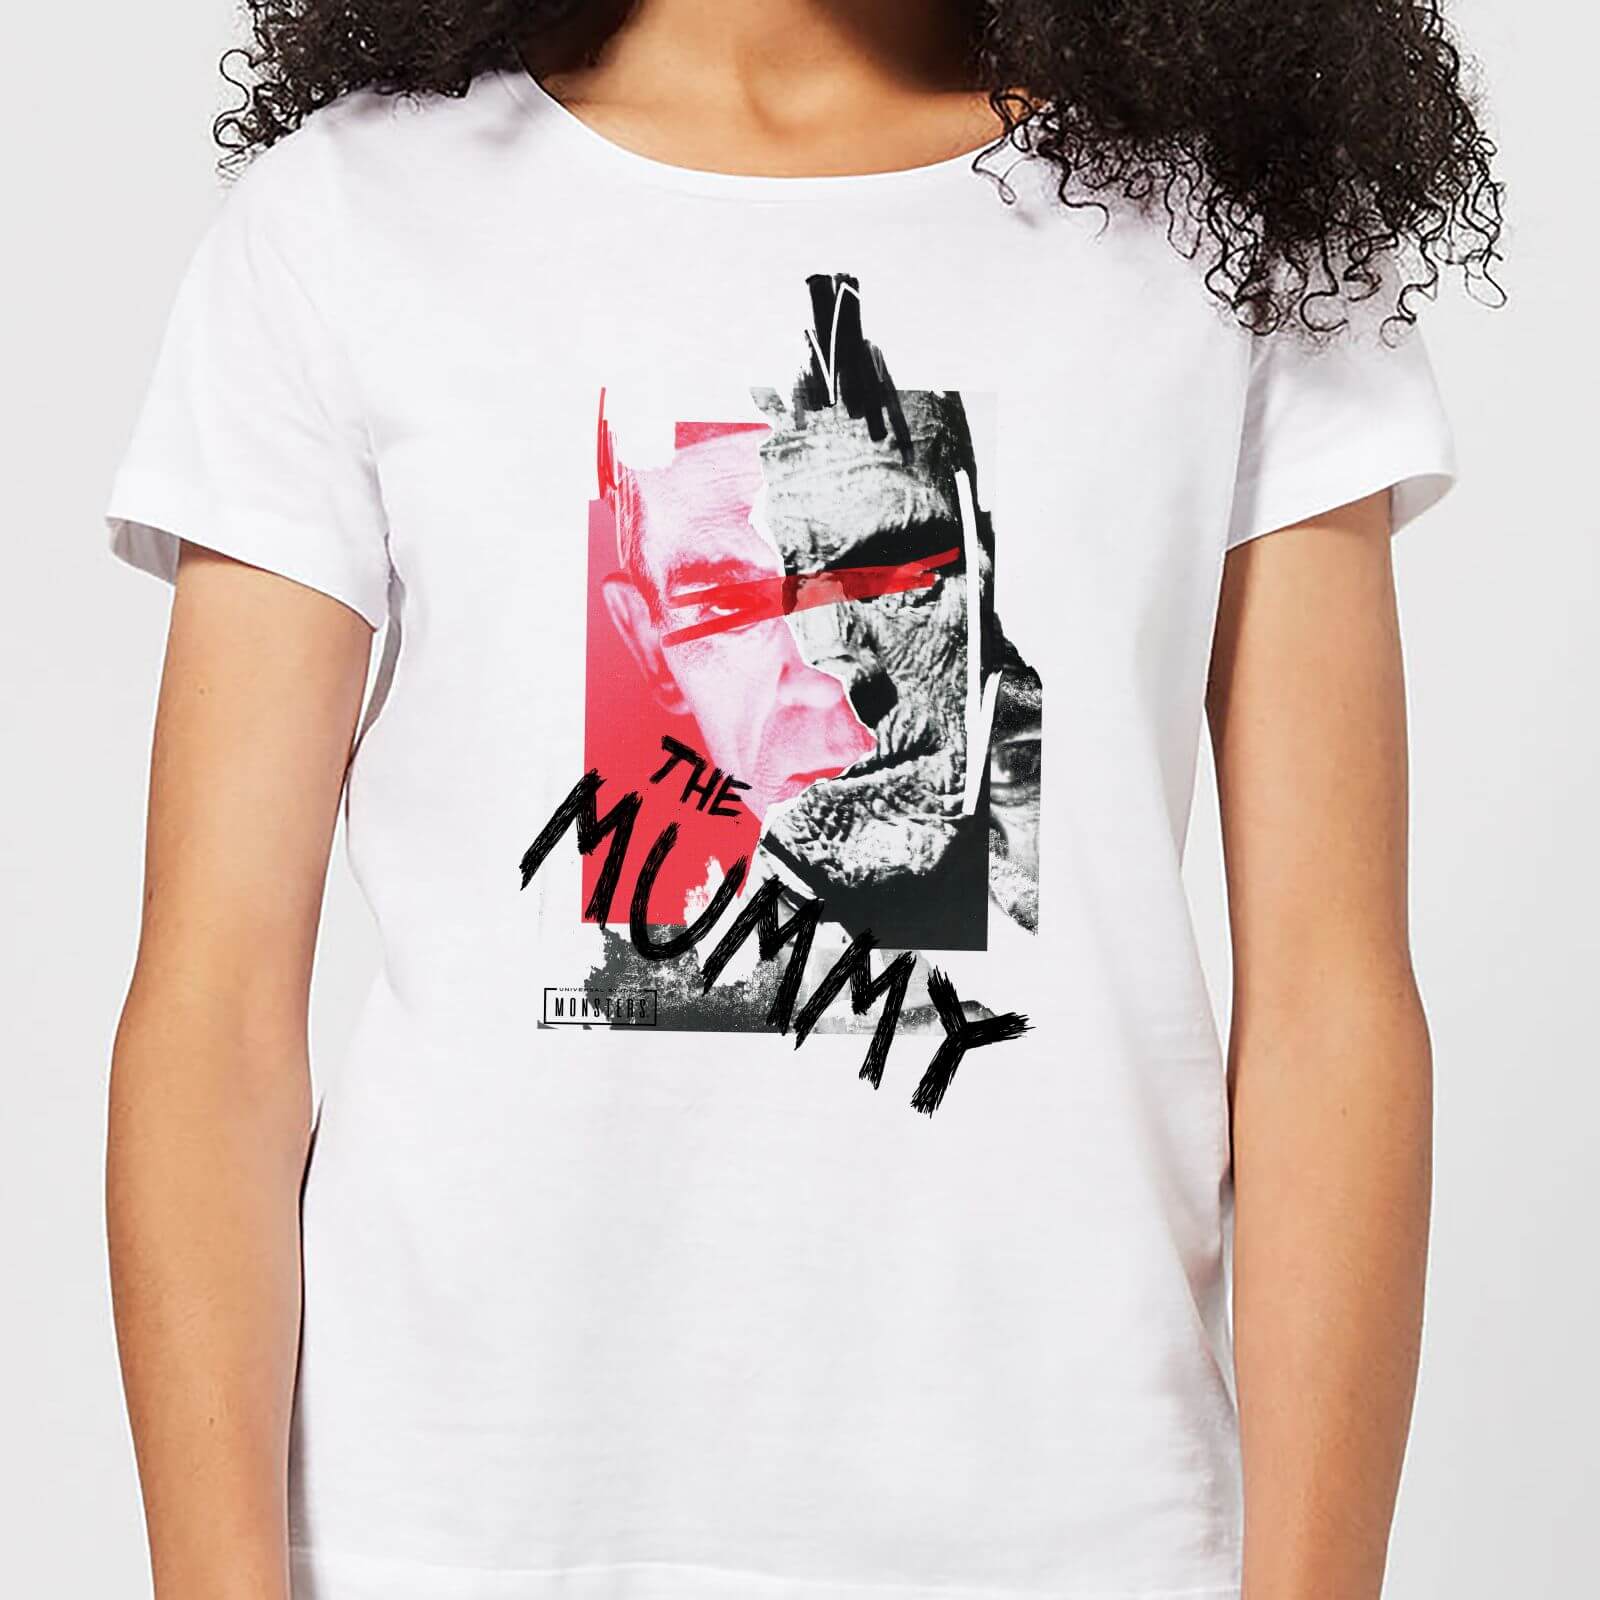 Universal Monsters The Mummy Collage Women's T-Shirt - White - 4XL - White